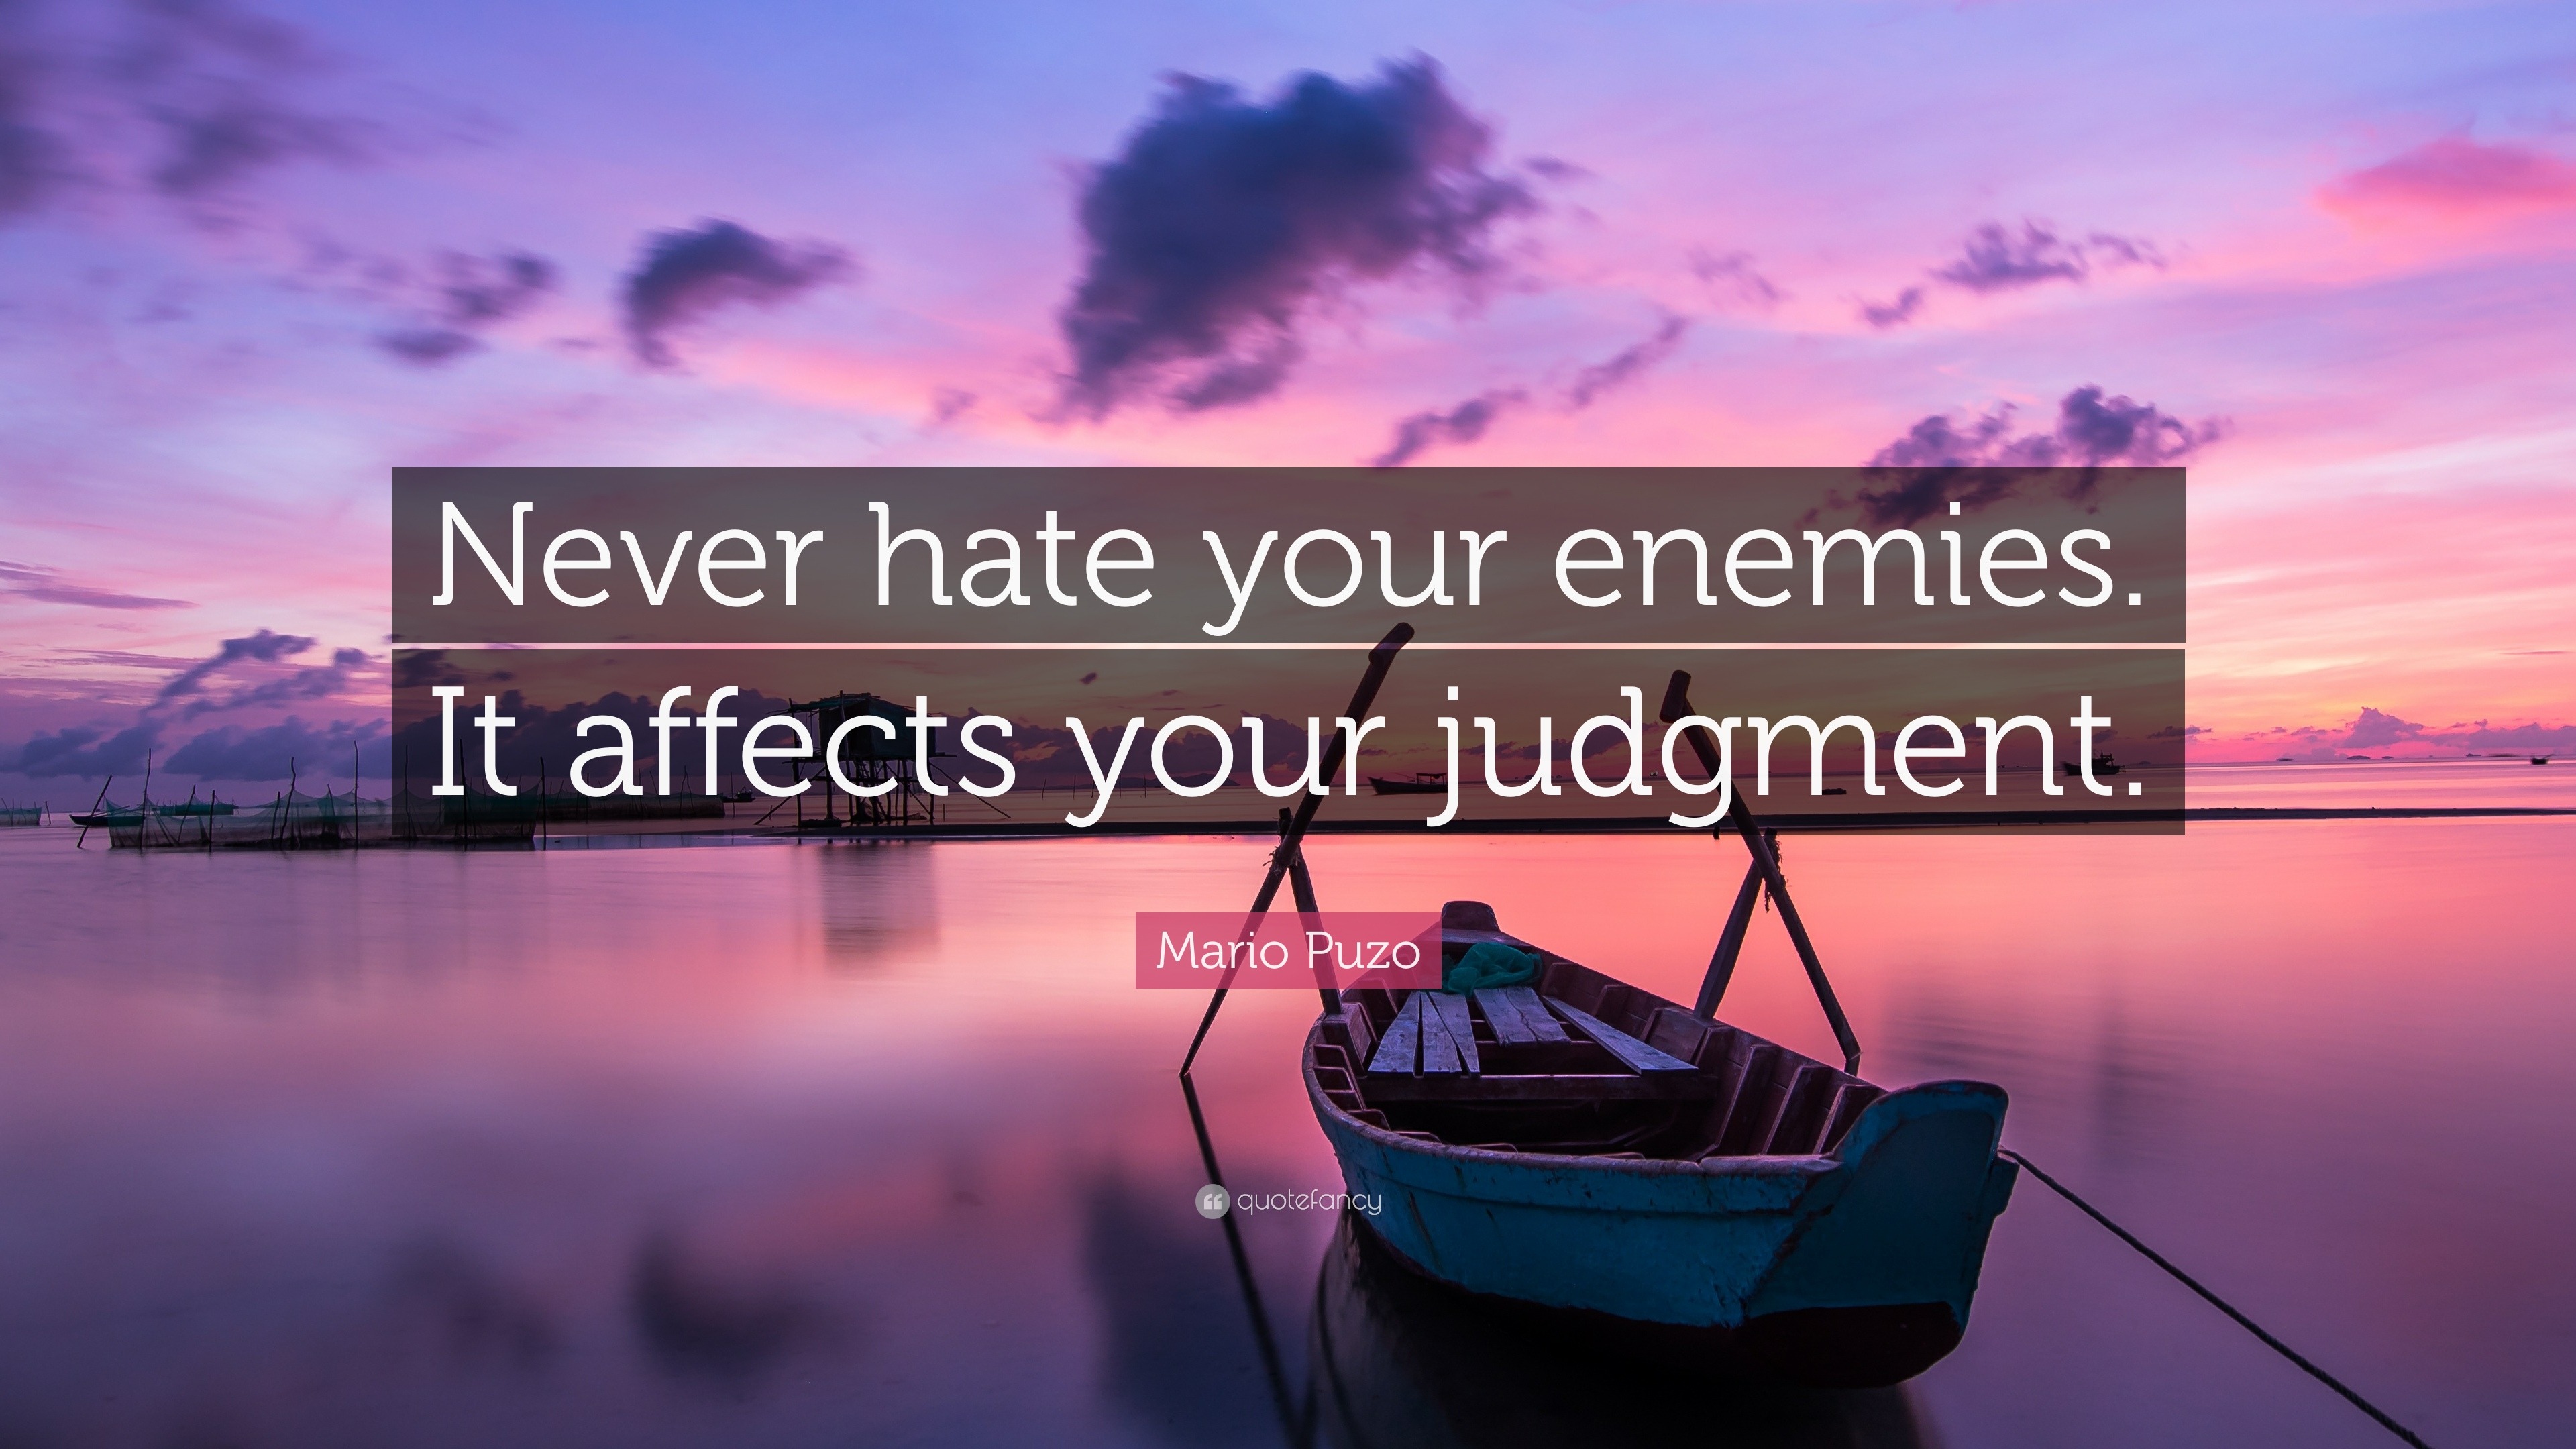 Mario Puzo Quote: "Never hate your enemies. It affects your judgment." (10 wallpapers) - Quotefancy